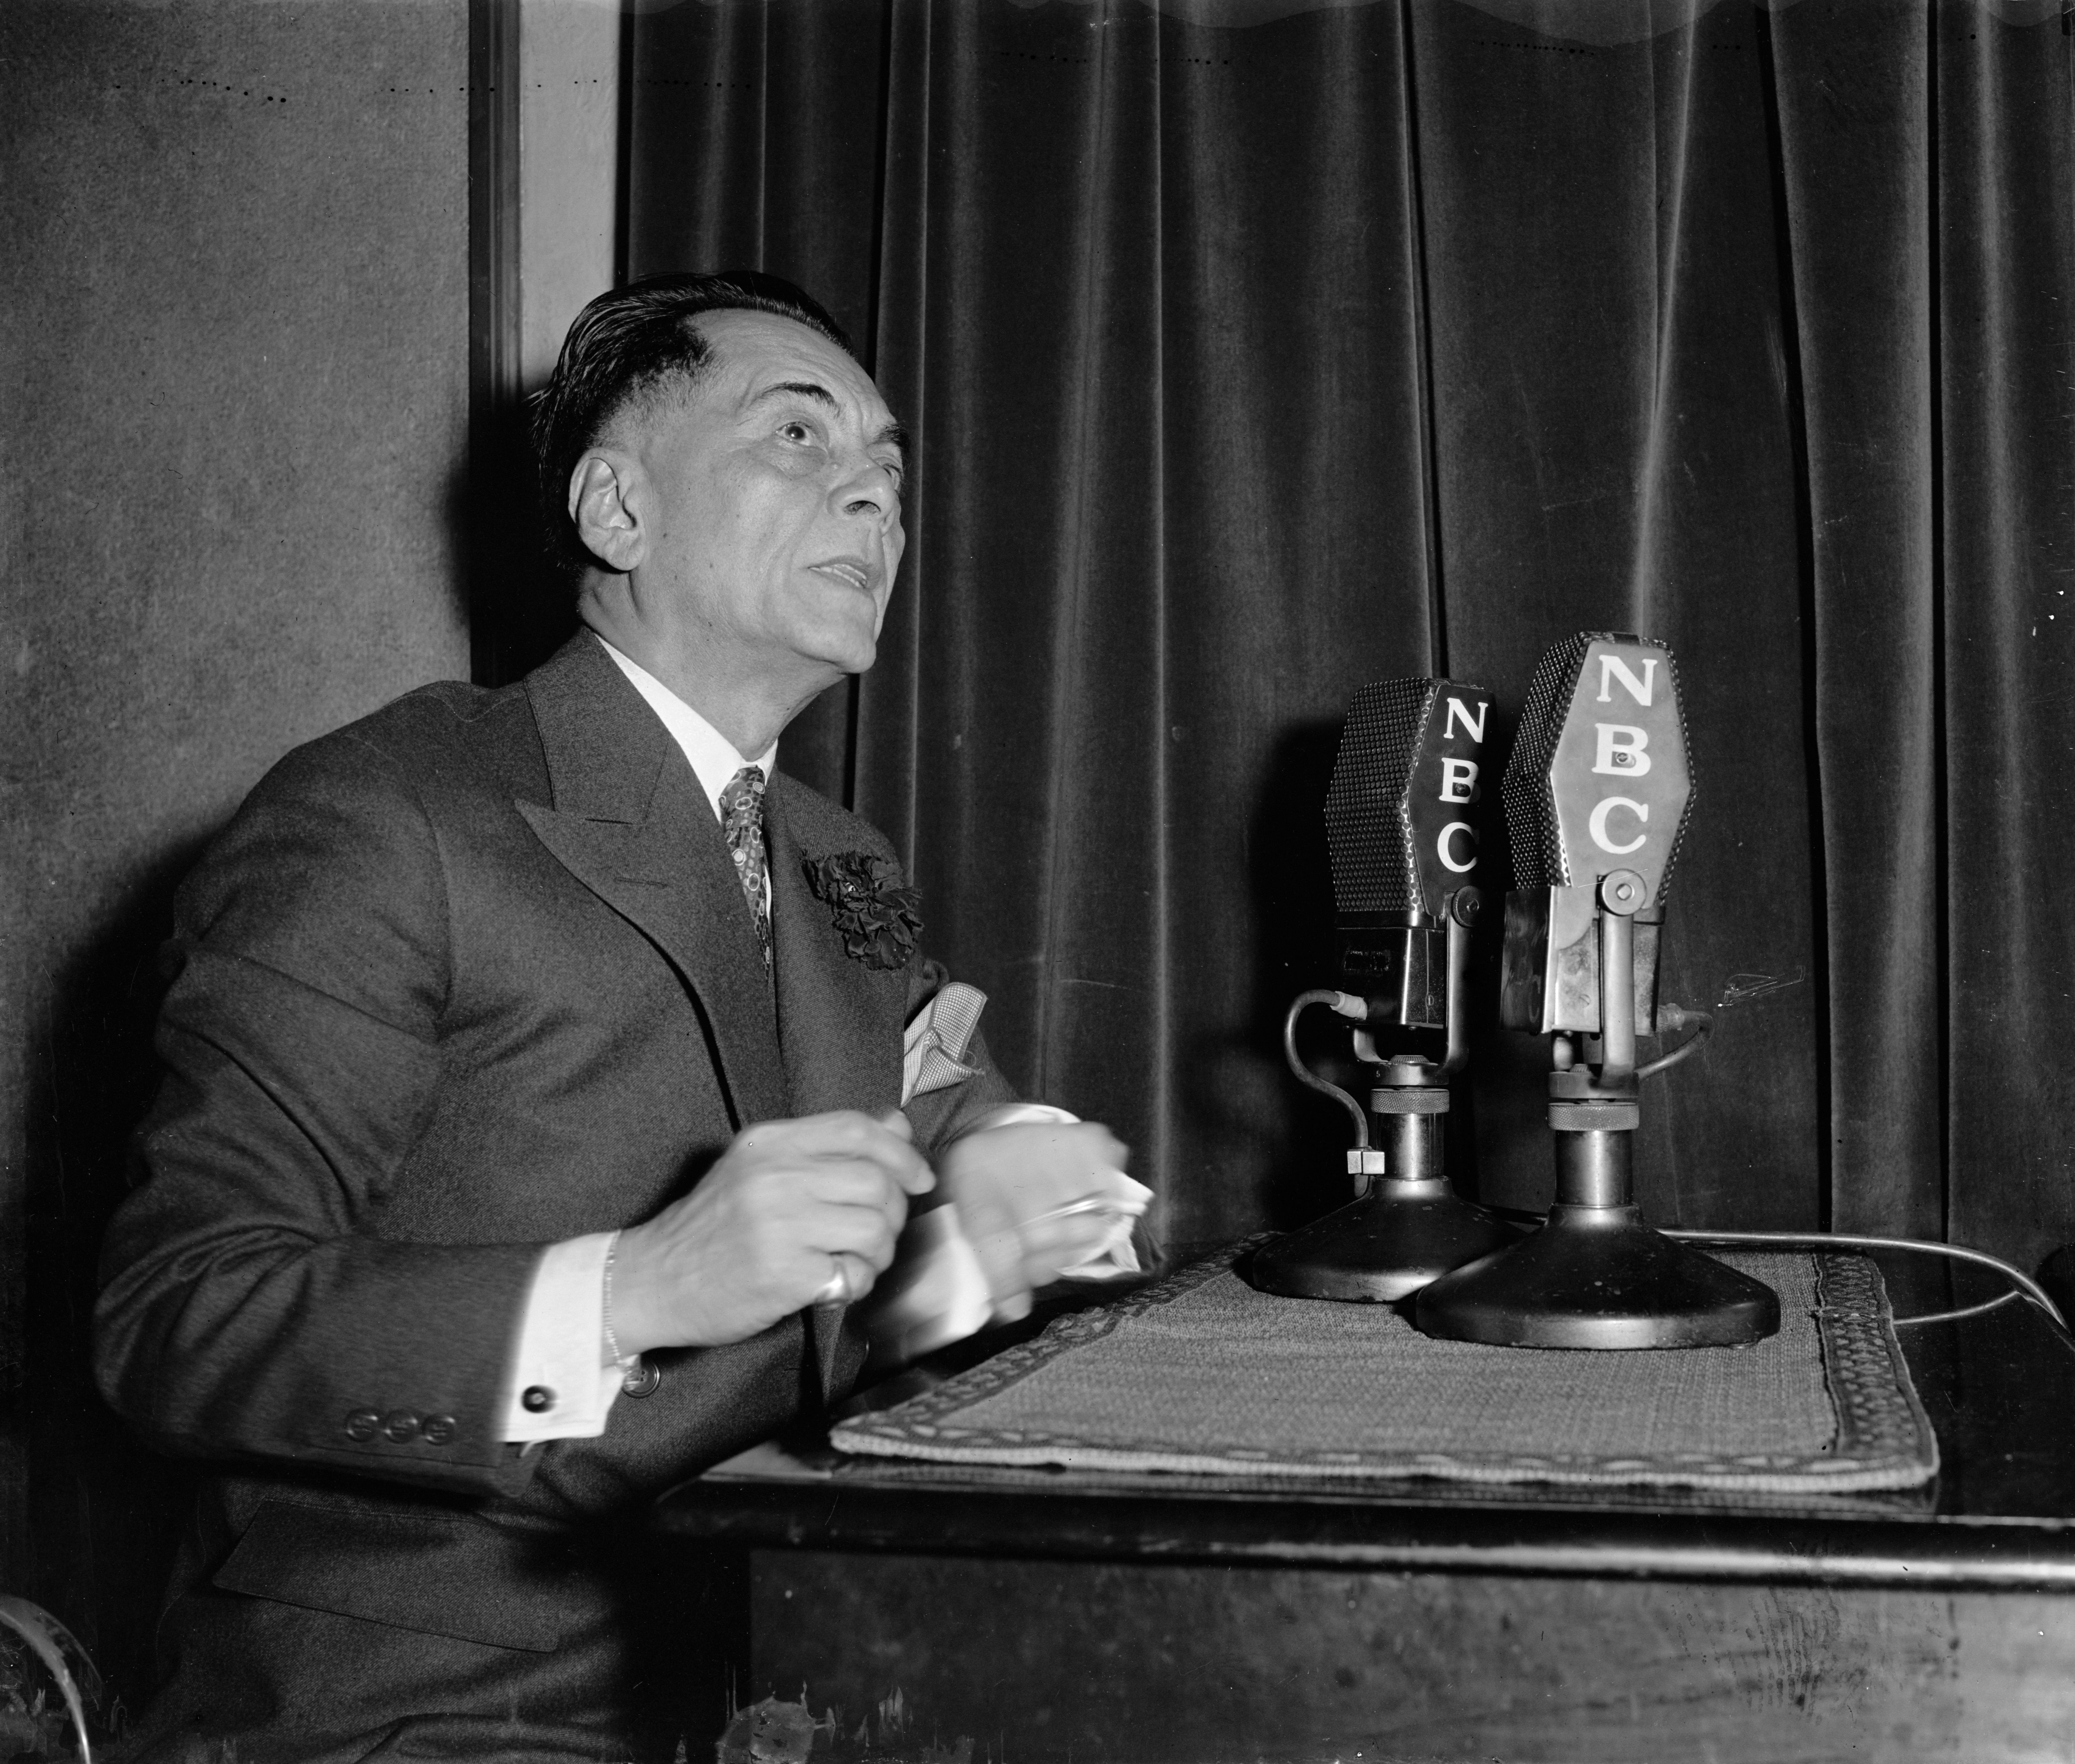 Manuel Quezon giving a radio address regarding woman suffrage and speeding up the Philippine independence timeline, Washington DC, United States, 5 Apr 1937, photo 2 of 2